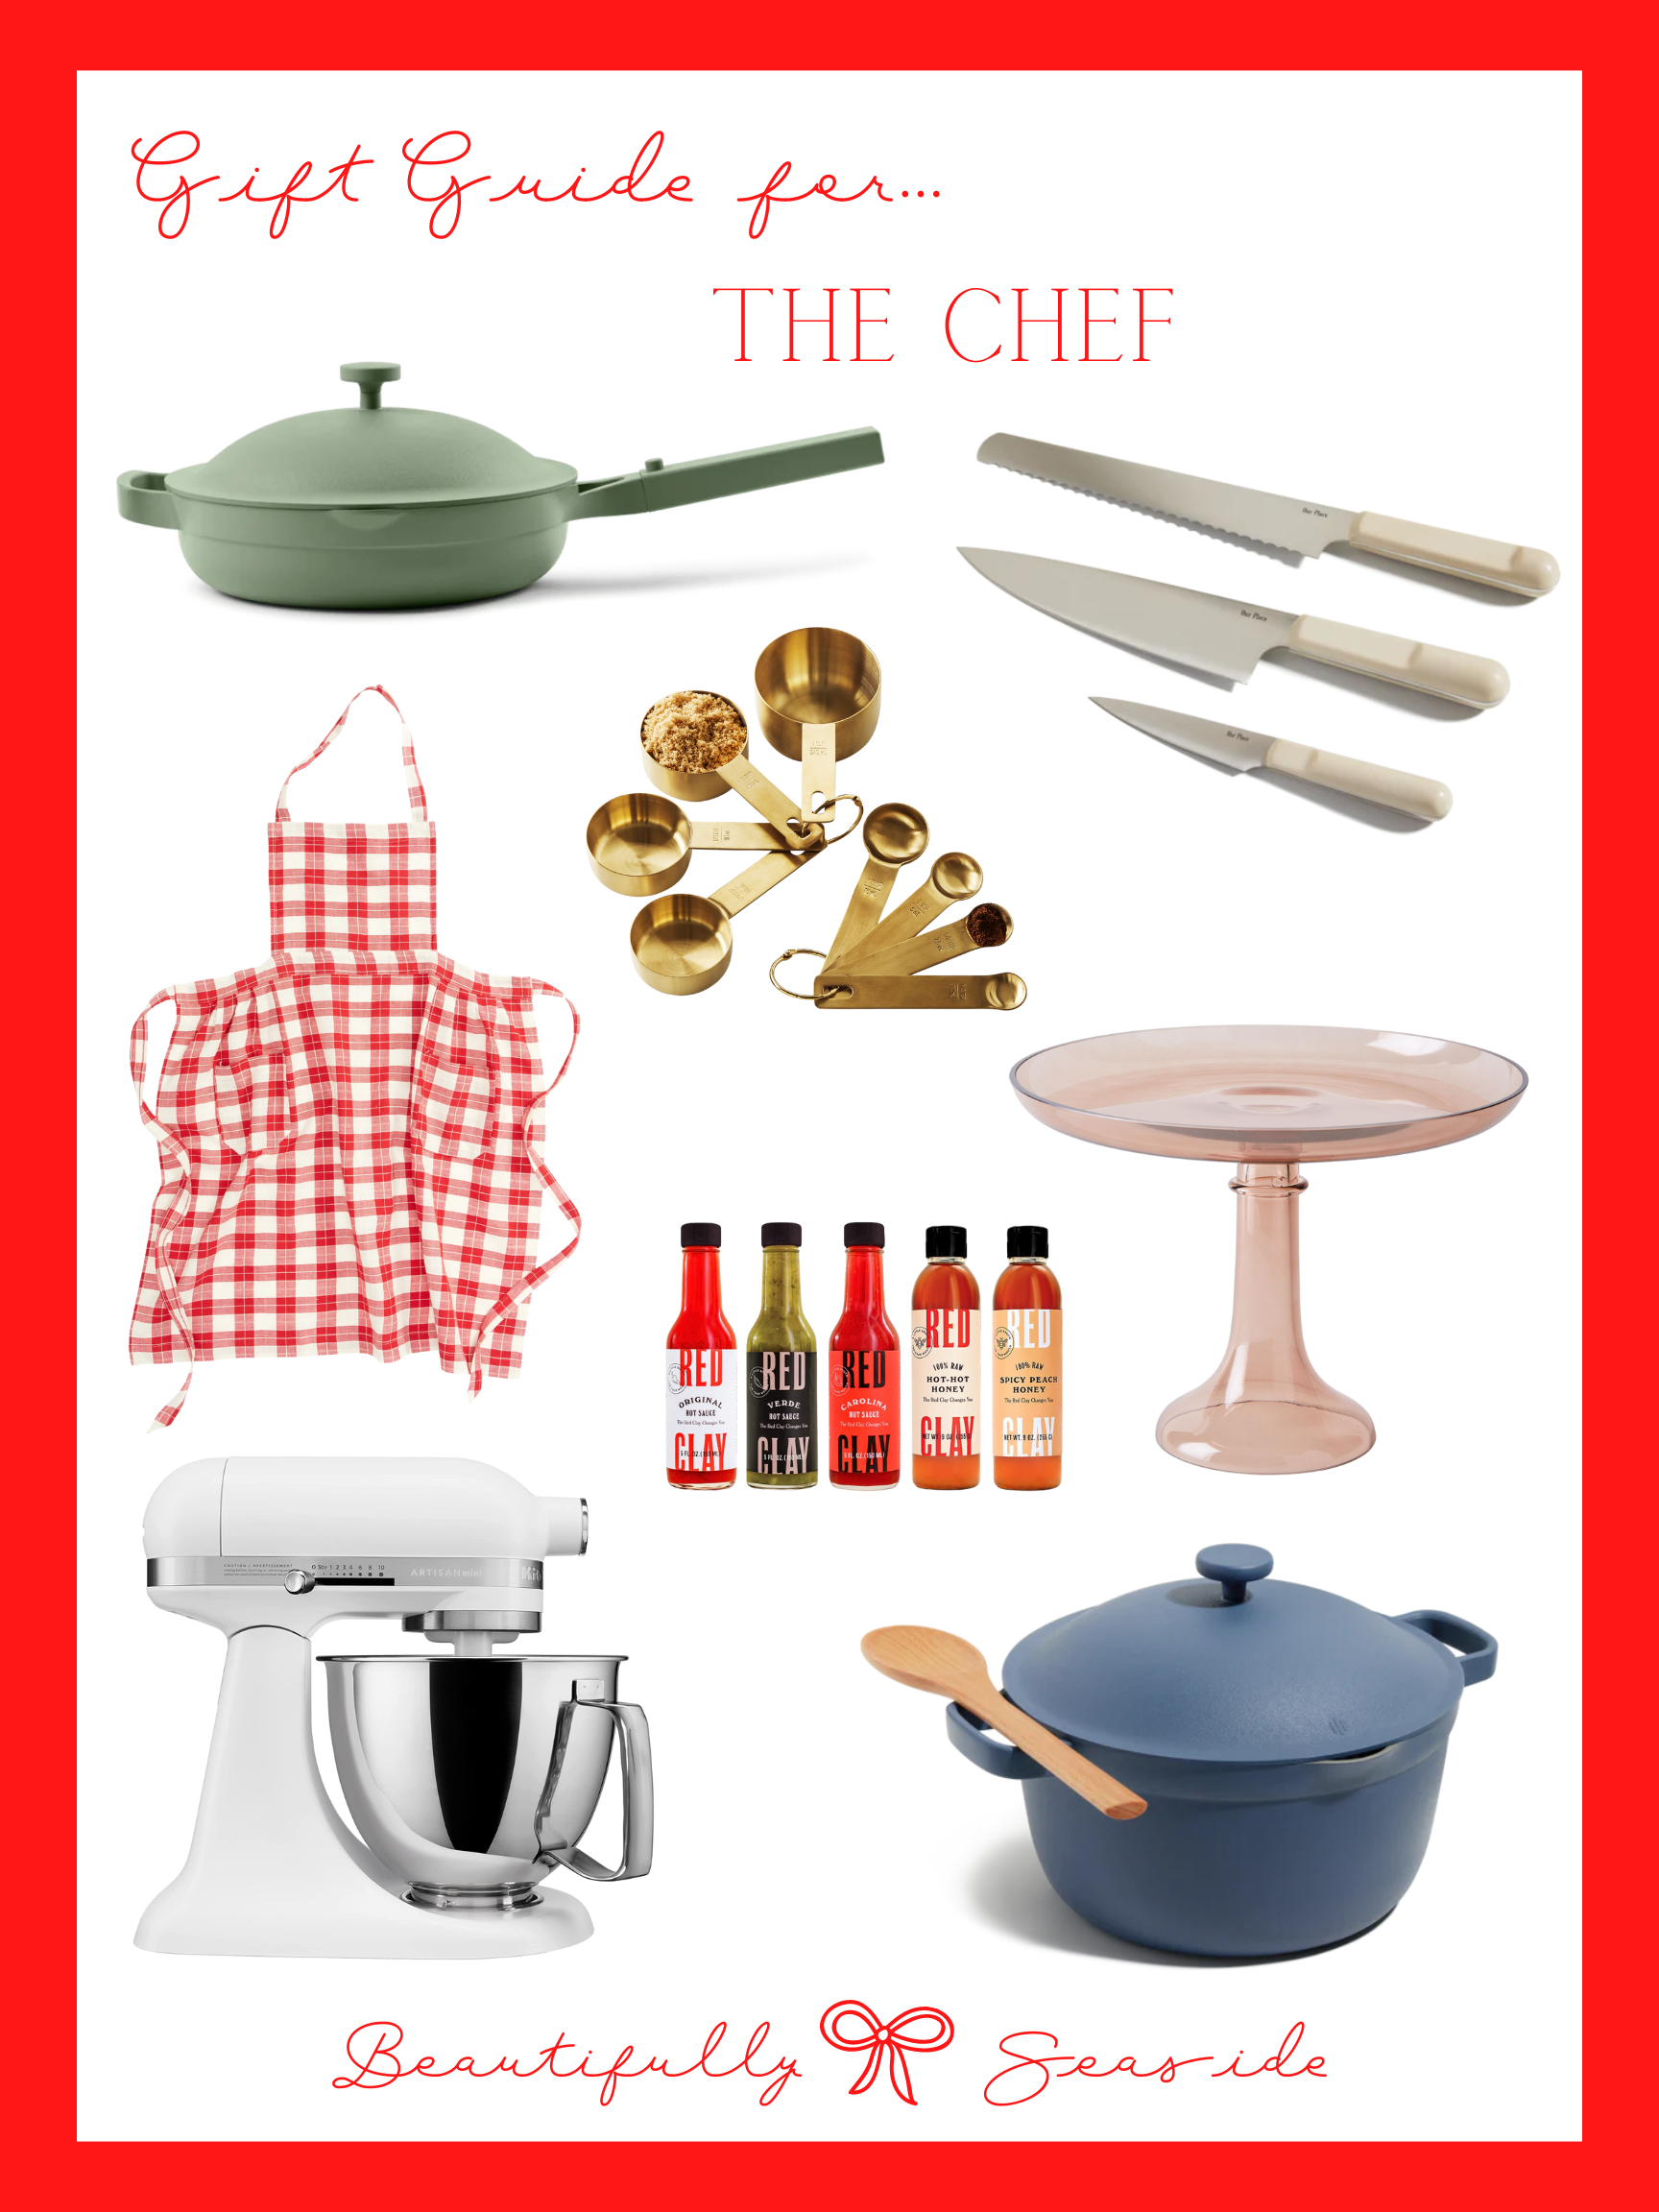 Desiree Leone of Beautifully Seaside features the Holiday Gift Guide for the Chef.